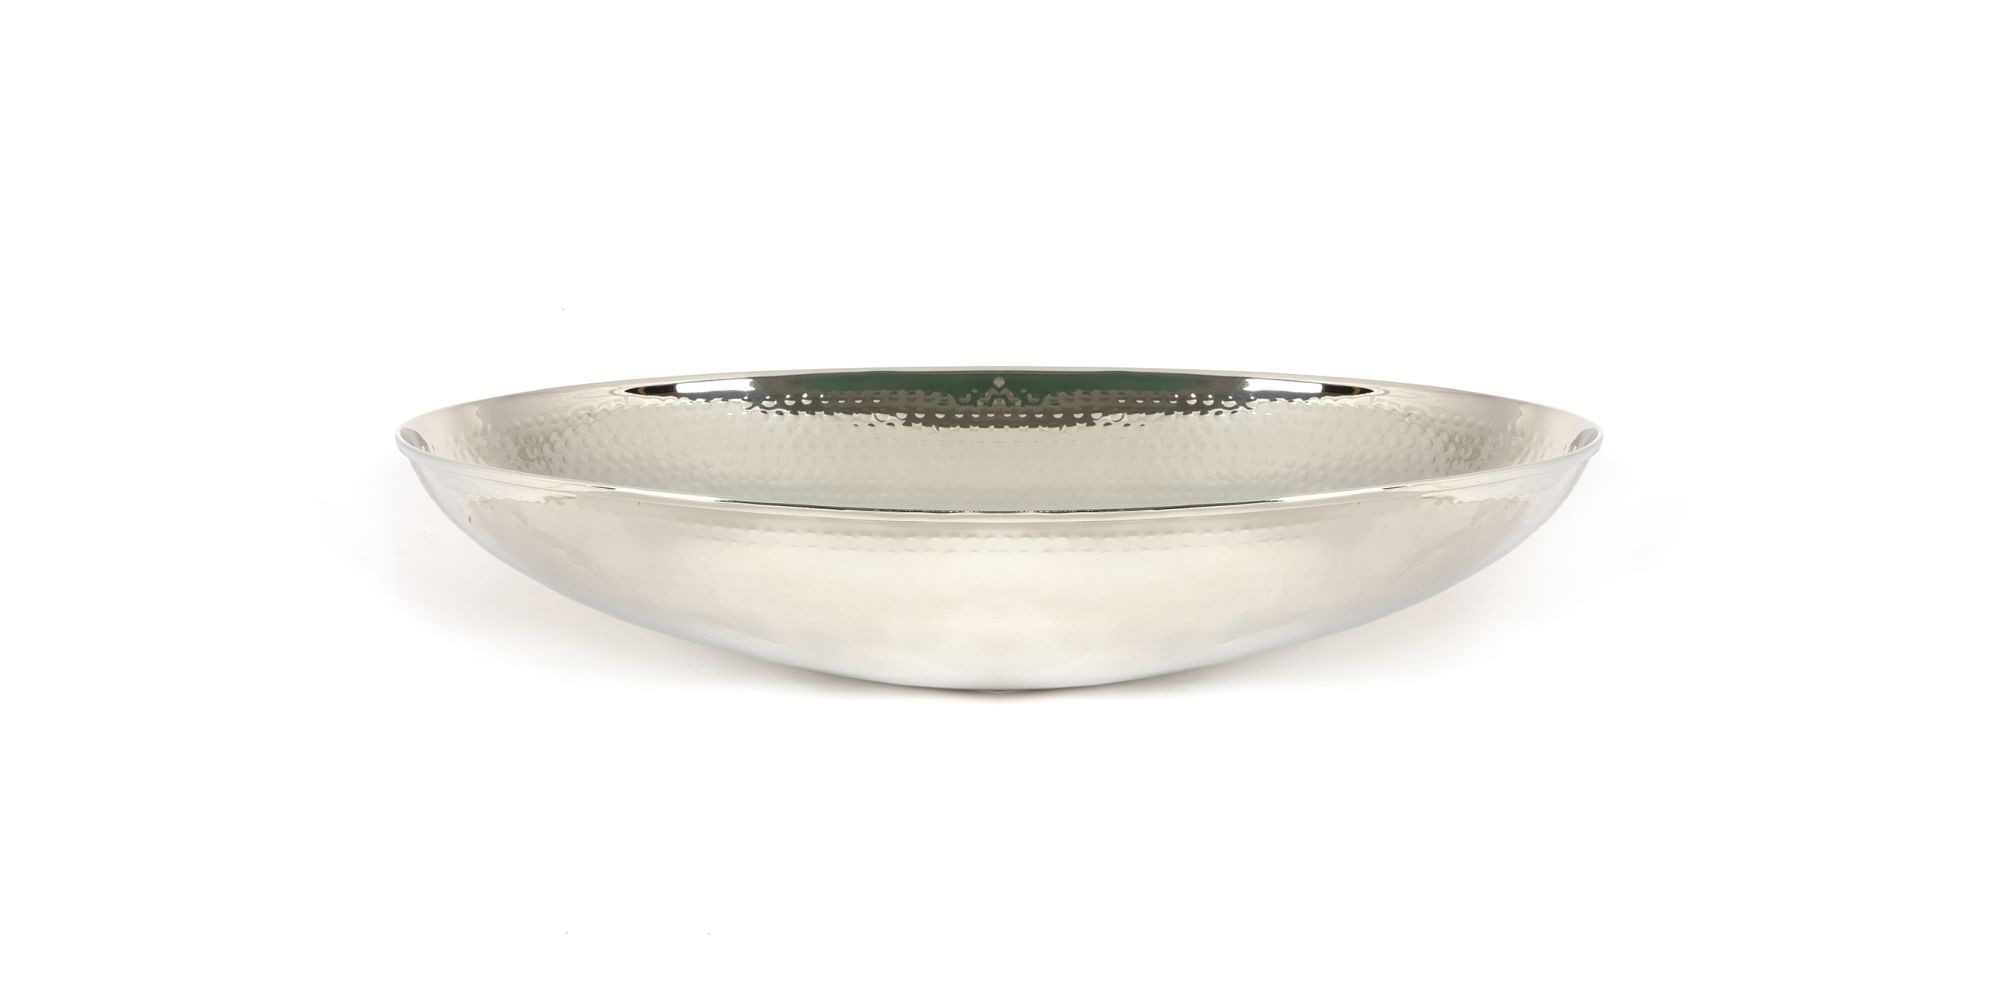 From The Anvil Hammered Oval Sink Nickel [47204]